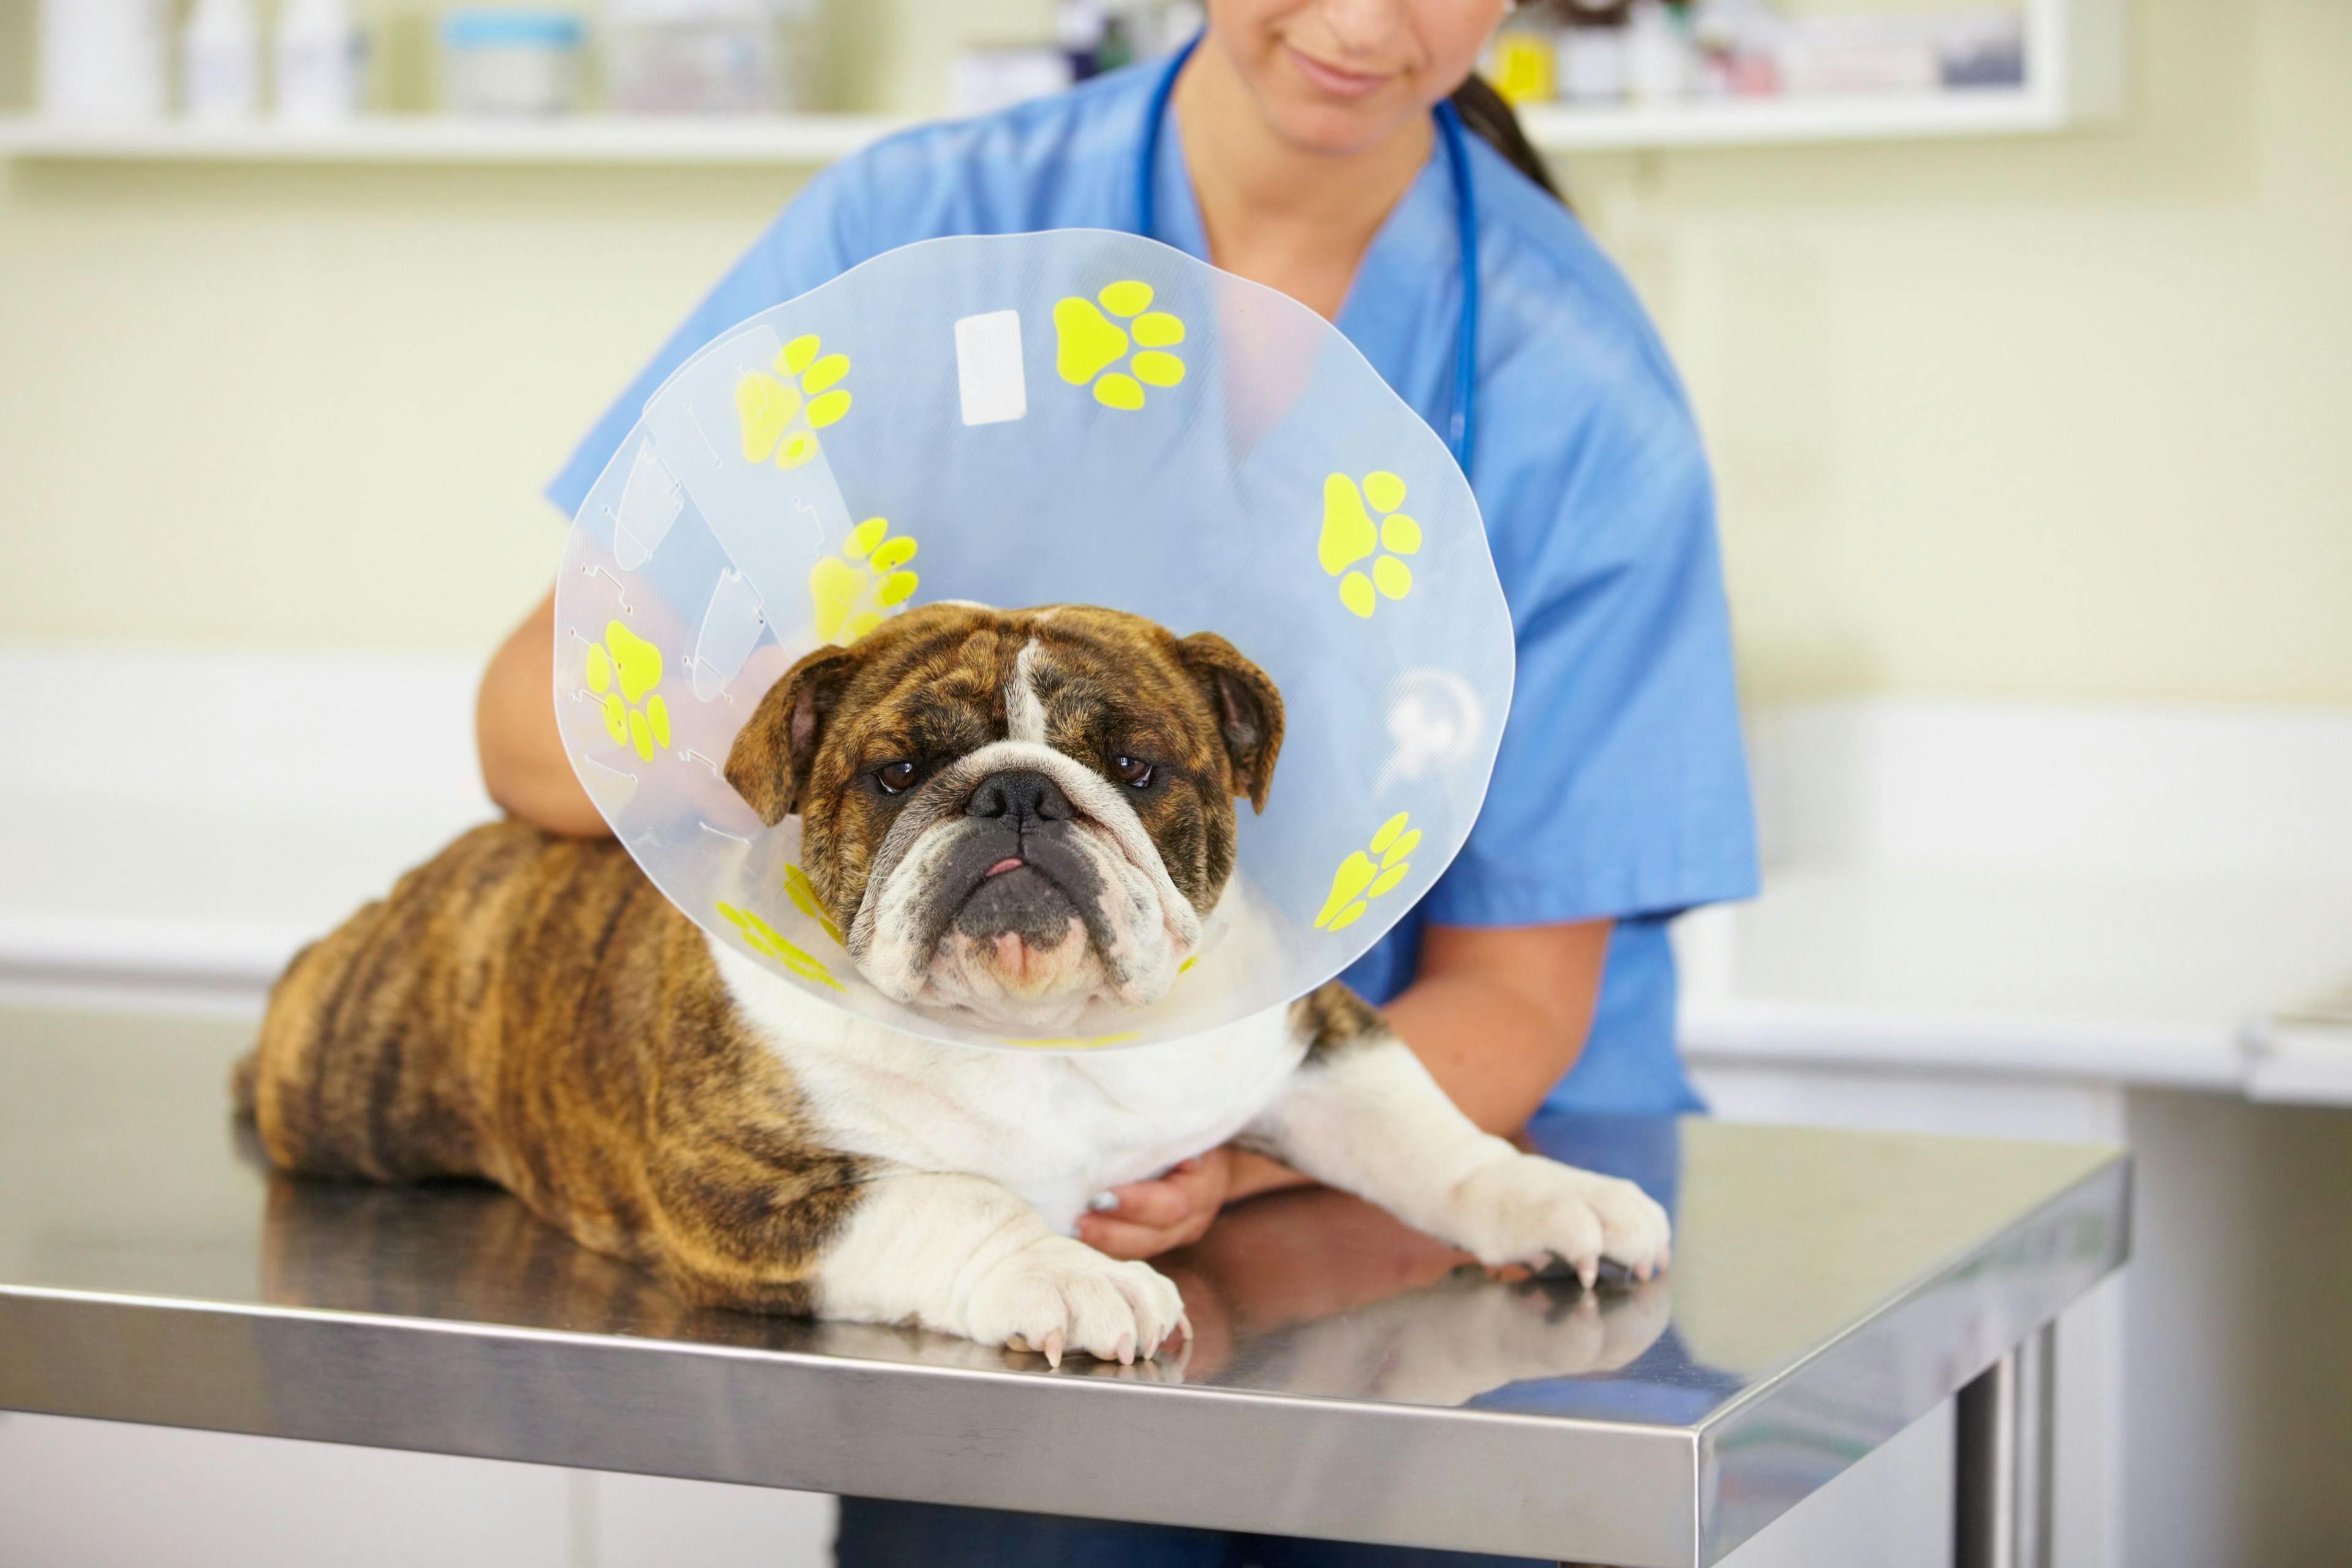 A staff member at a veterinary clinic is taking care of a dog on the table